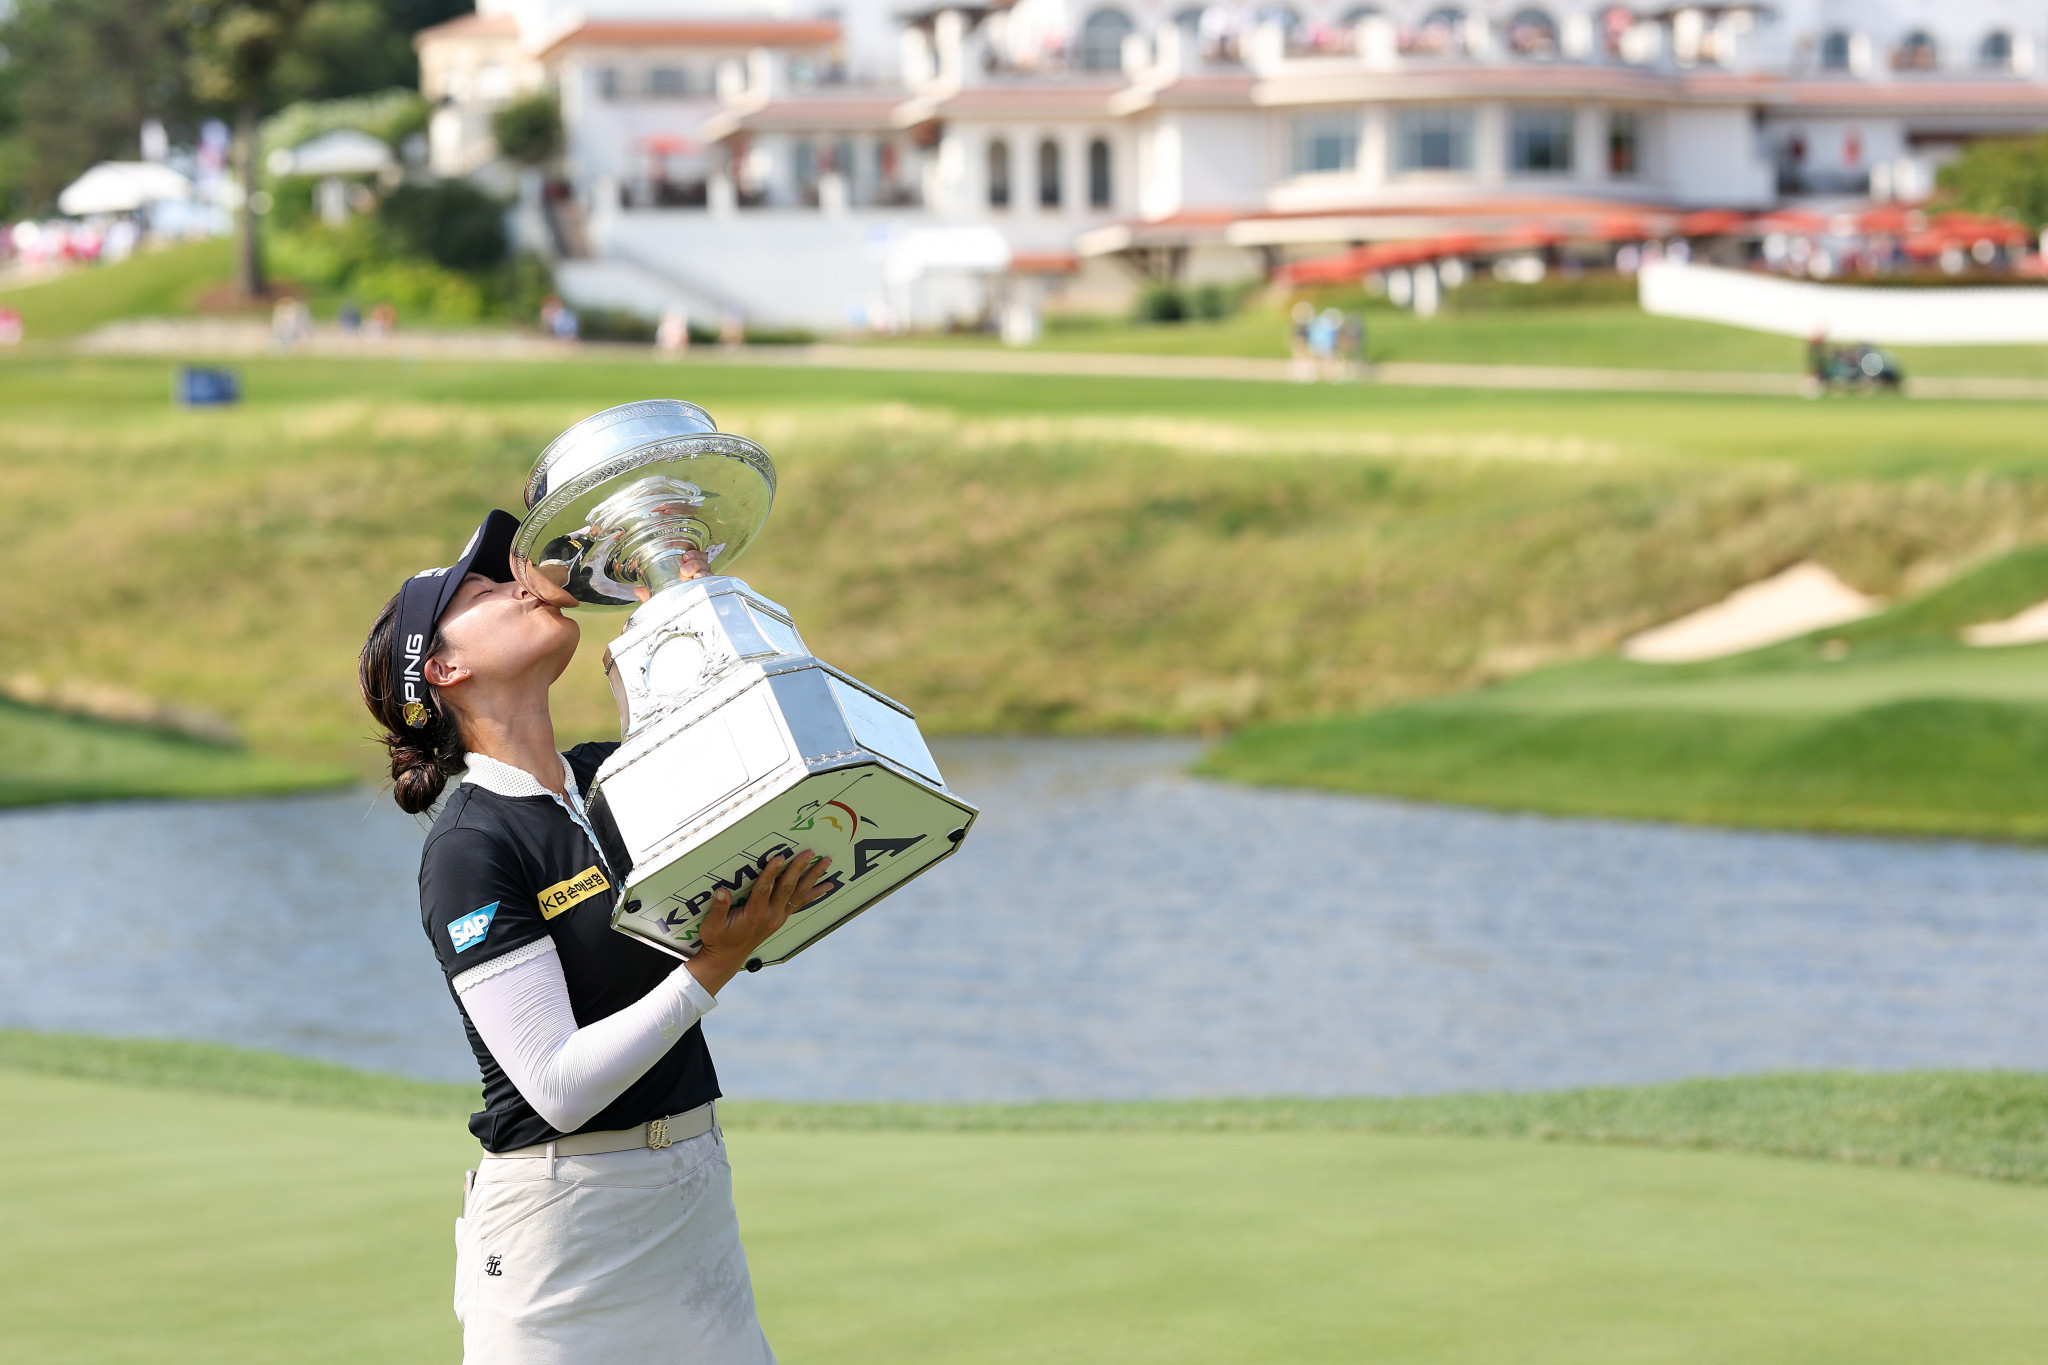 Chun In-gee held on to win the Women's PGA Championship in Maryland ©Getty Images